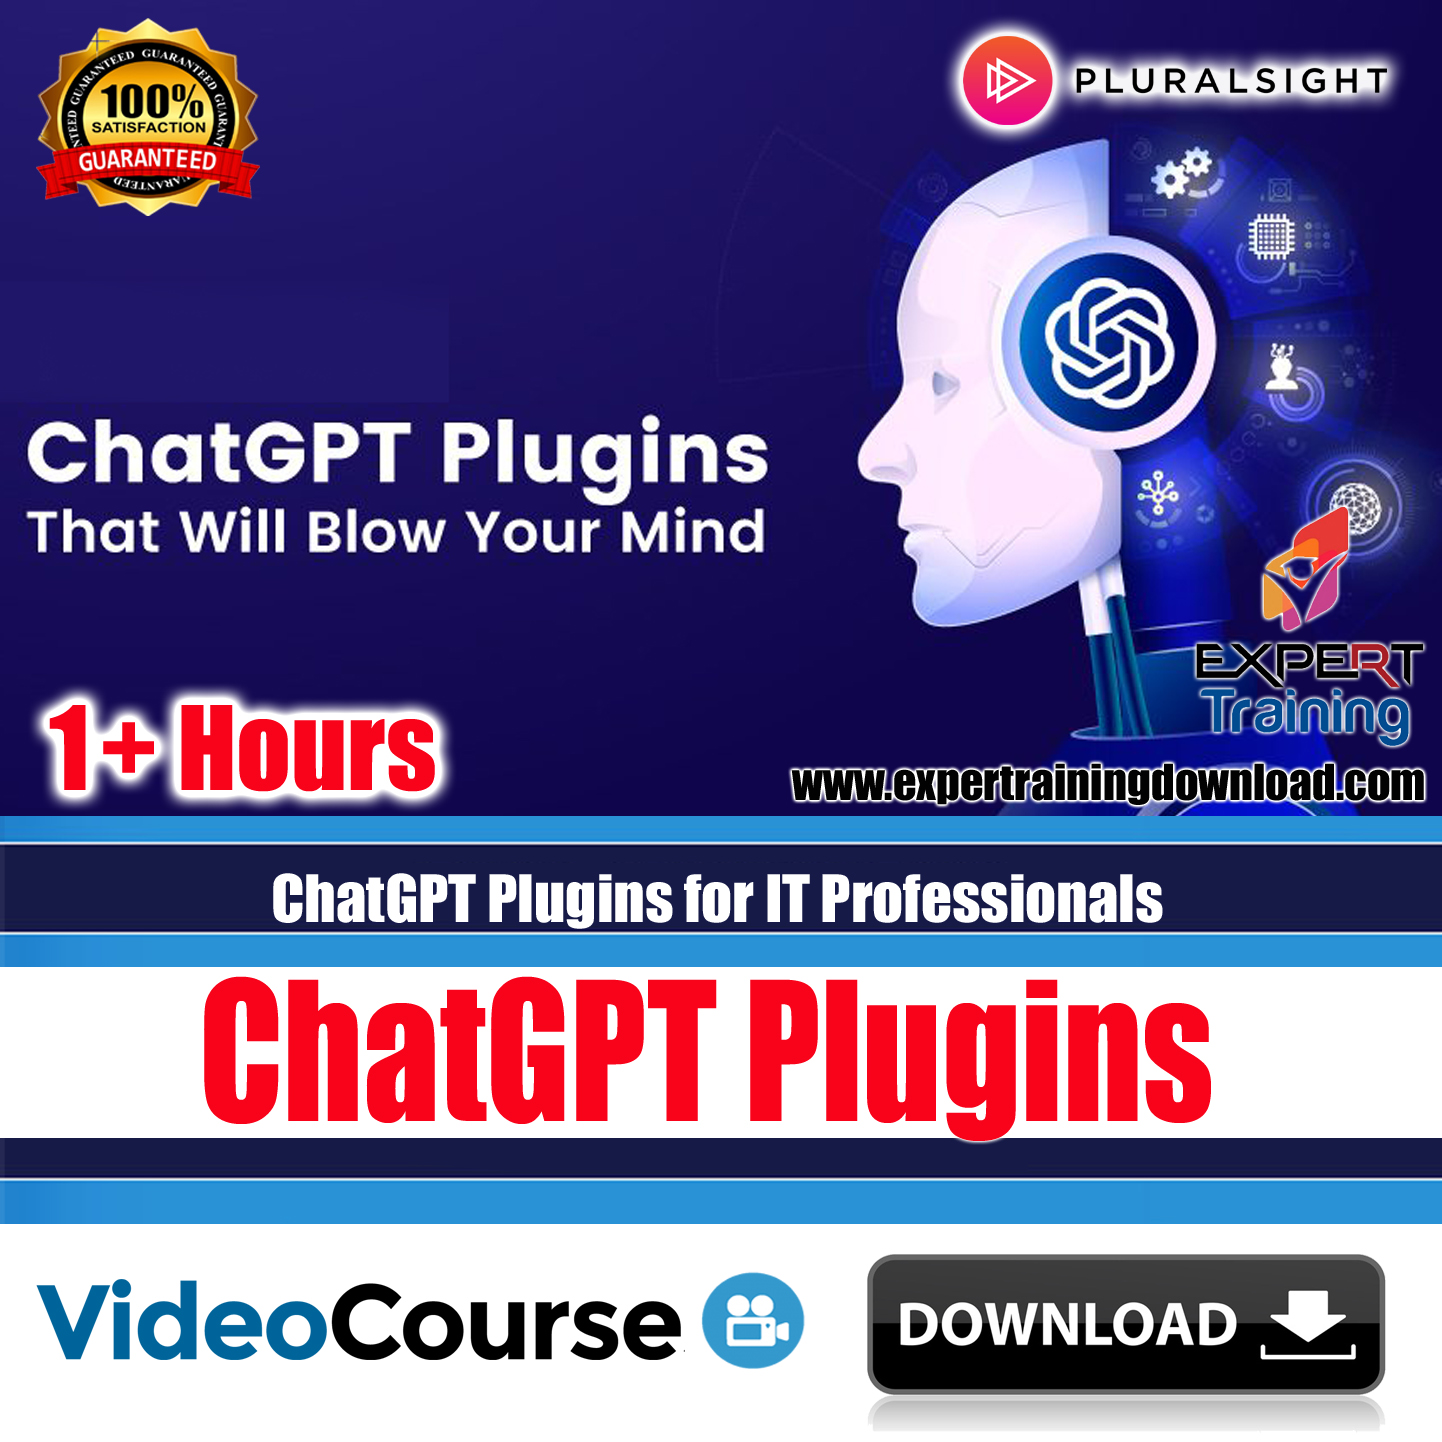 ChatGPT Plugins for IT Professionals